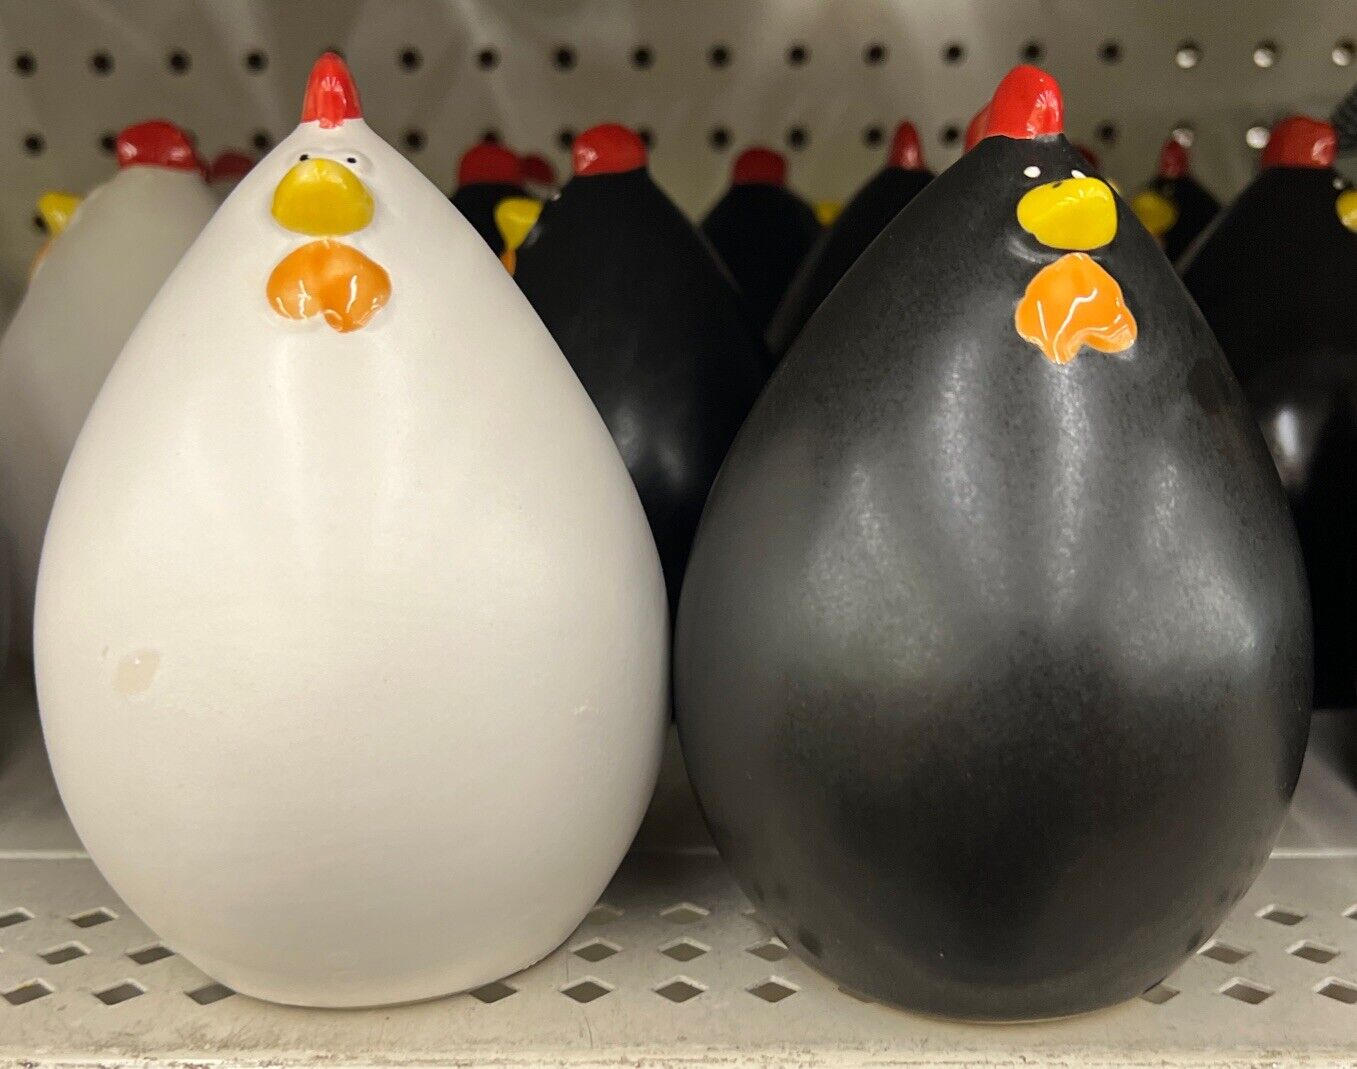 Egg Shaped Chicken Decor Resin or Polystyrene Material 5 Inches Tall, Set 2- Egg